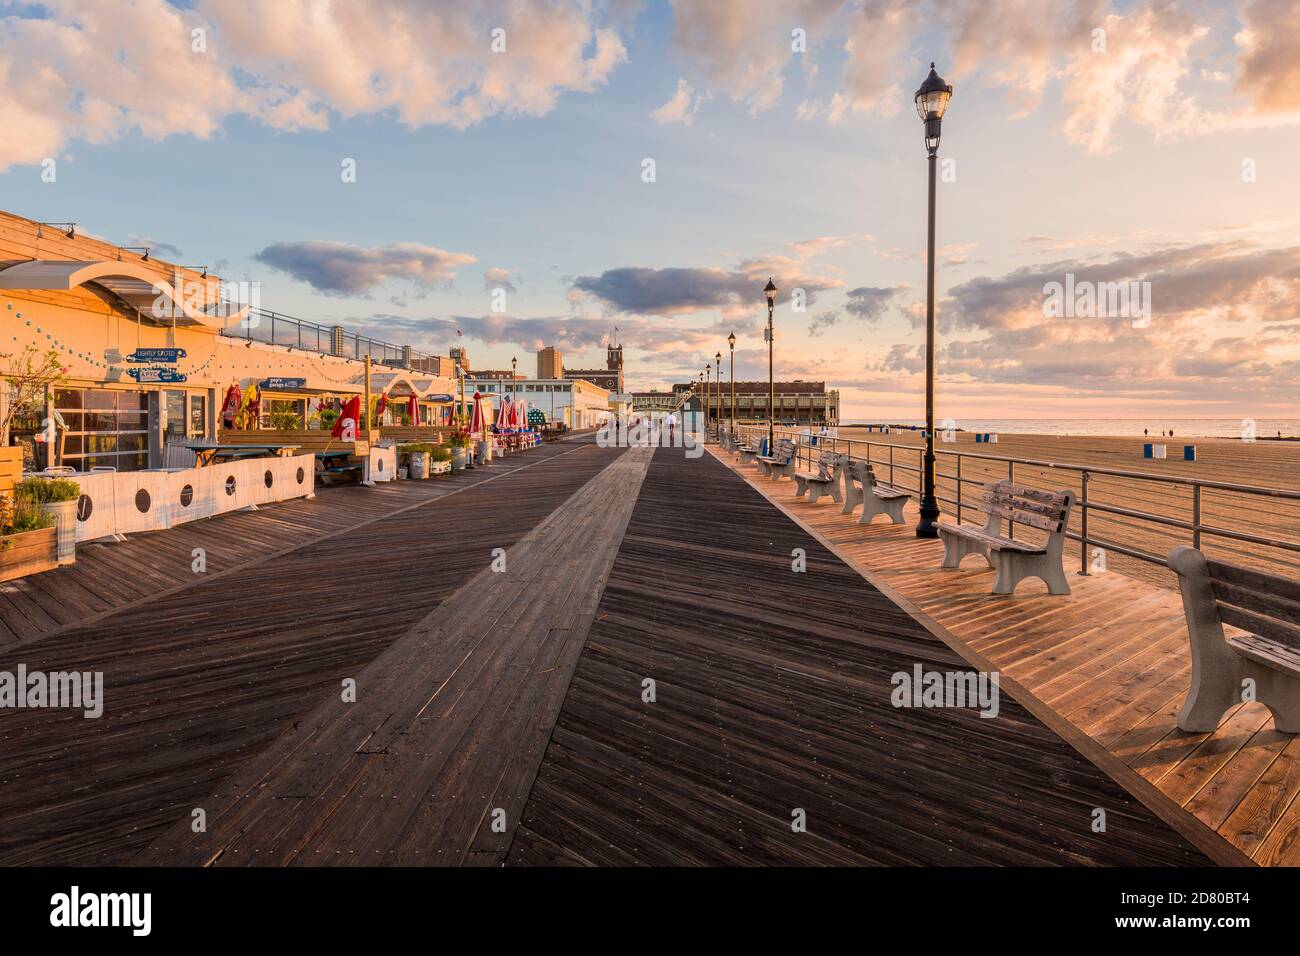 The boardwalk in Asbury Park with morning sun and shadows Stock Photo